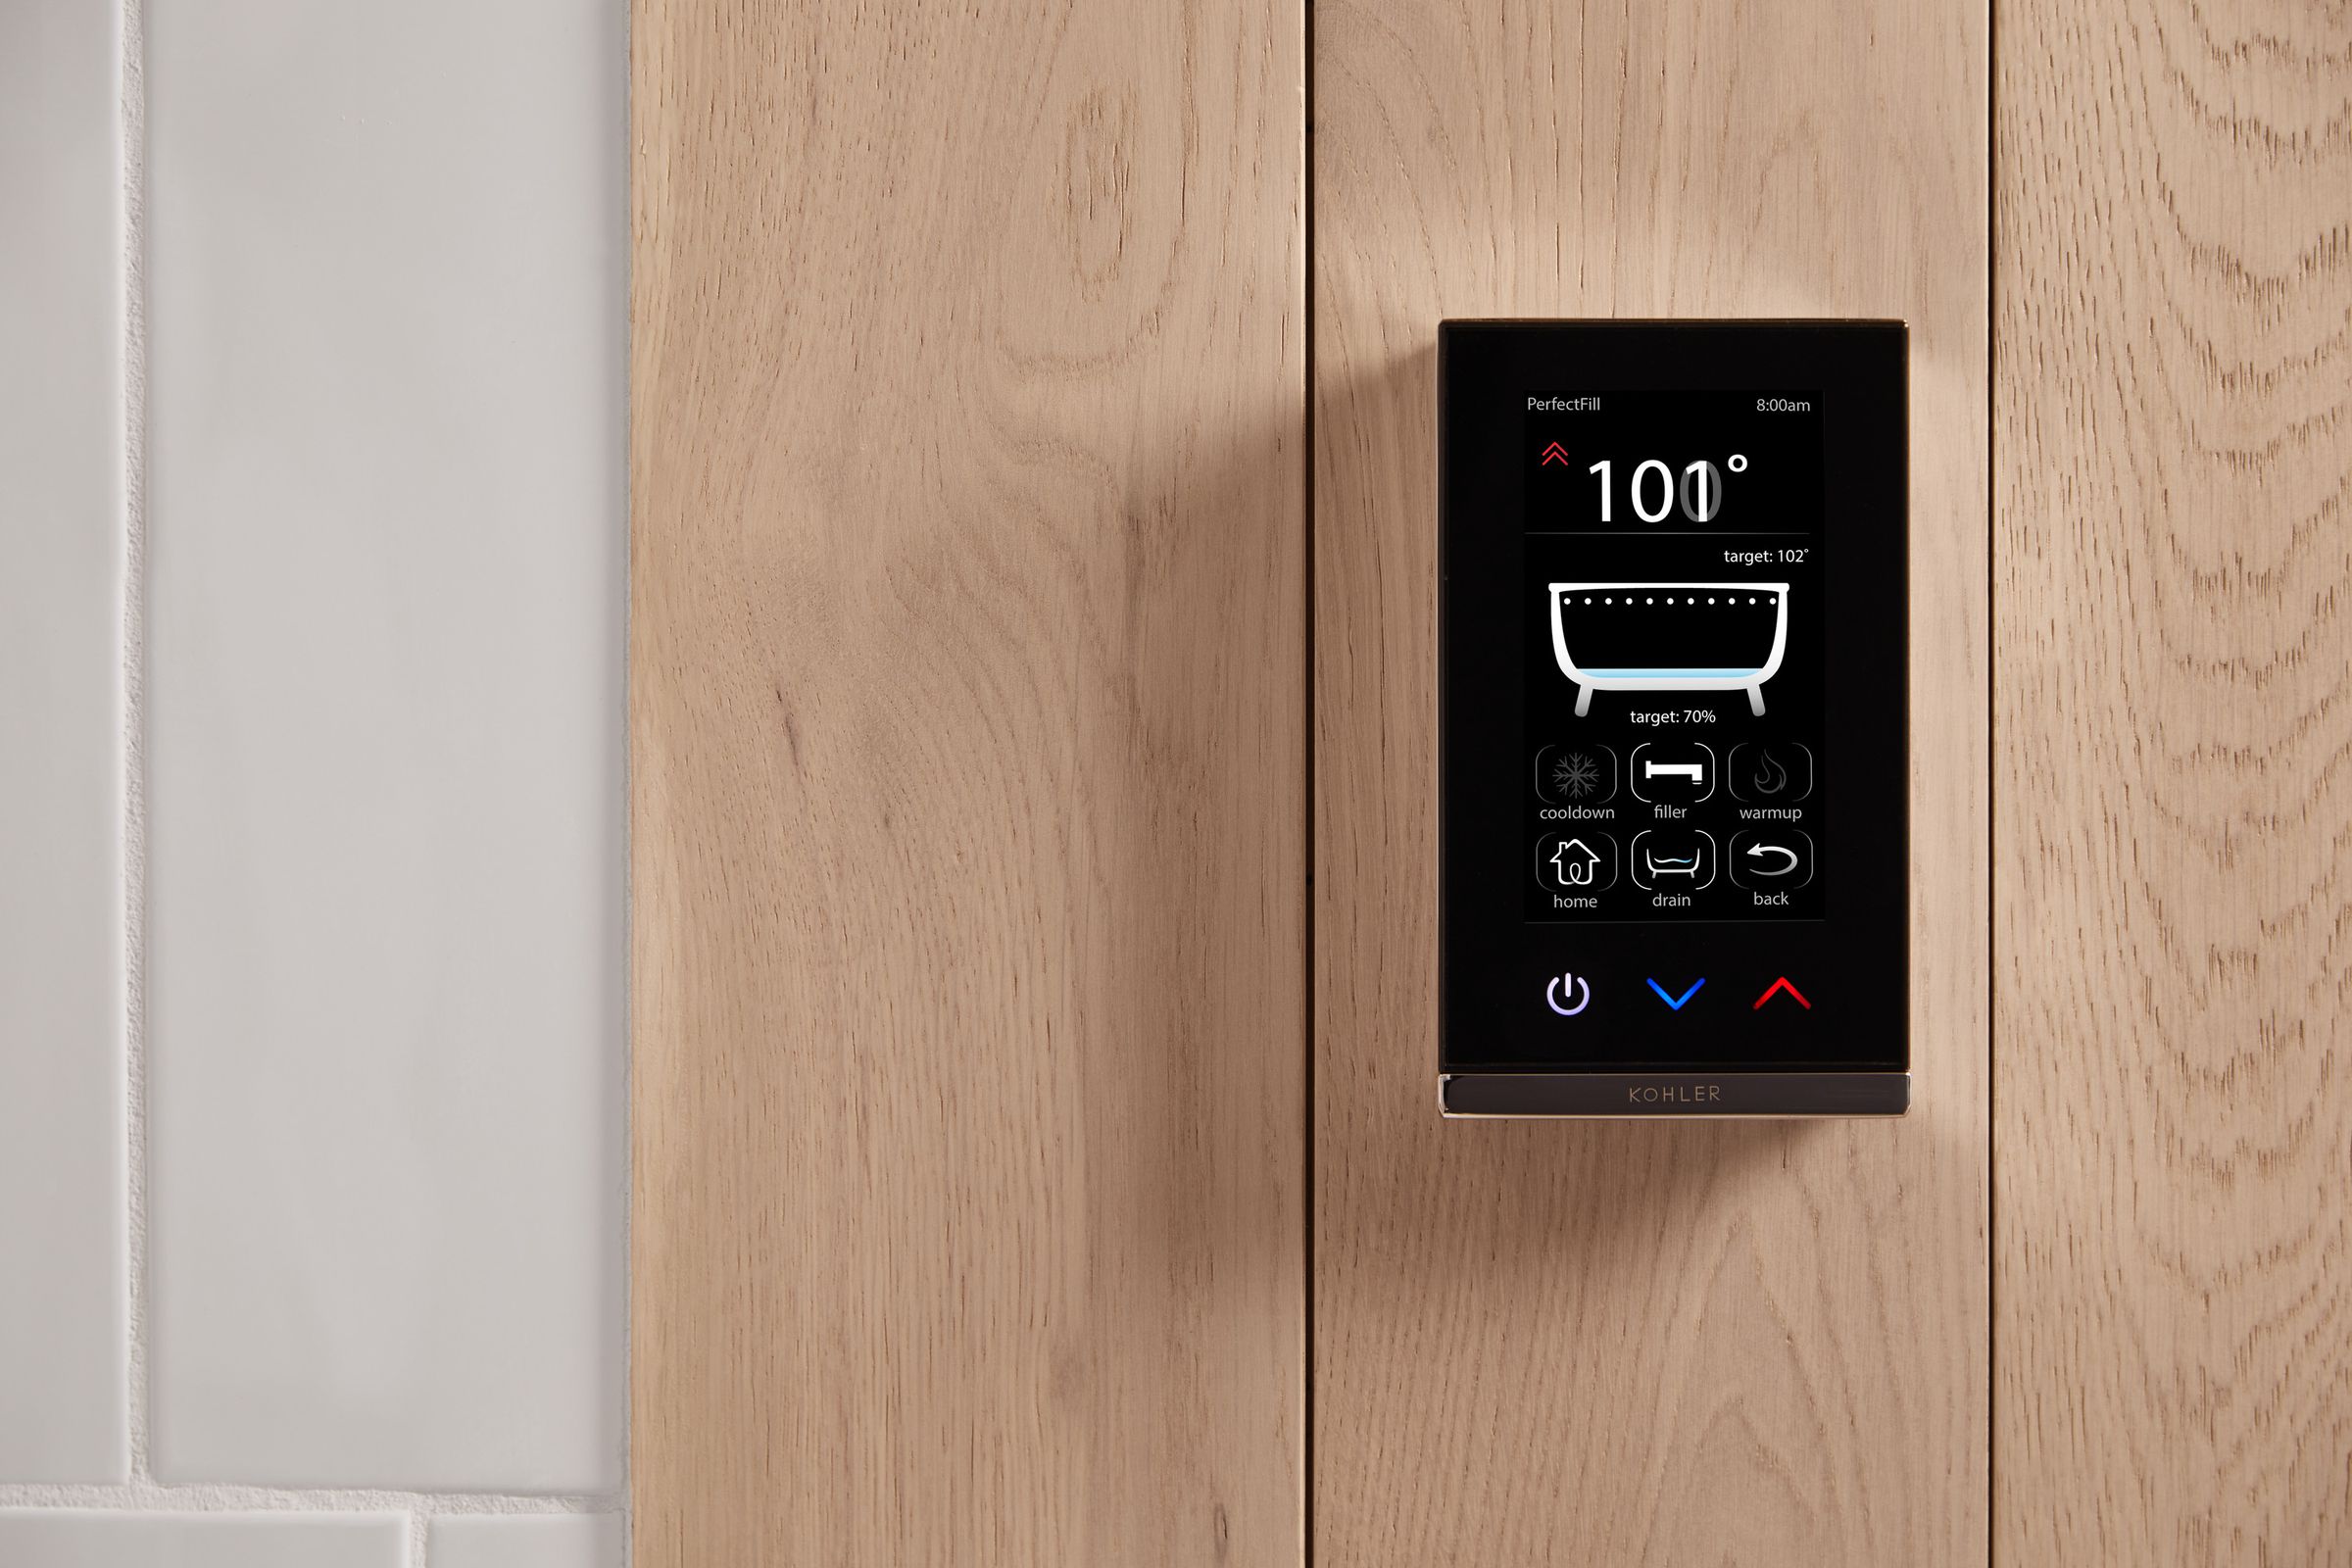 The PerfectFill digital wall controller controls the system.